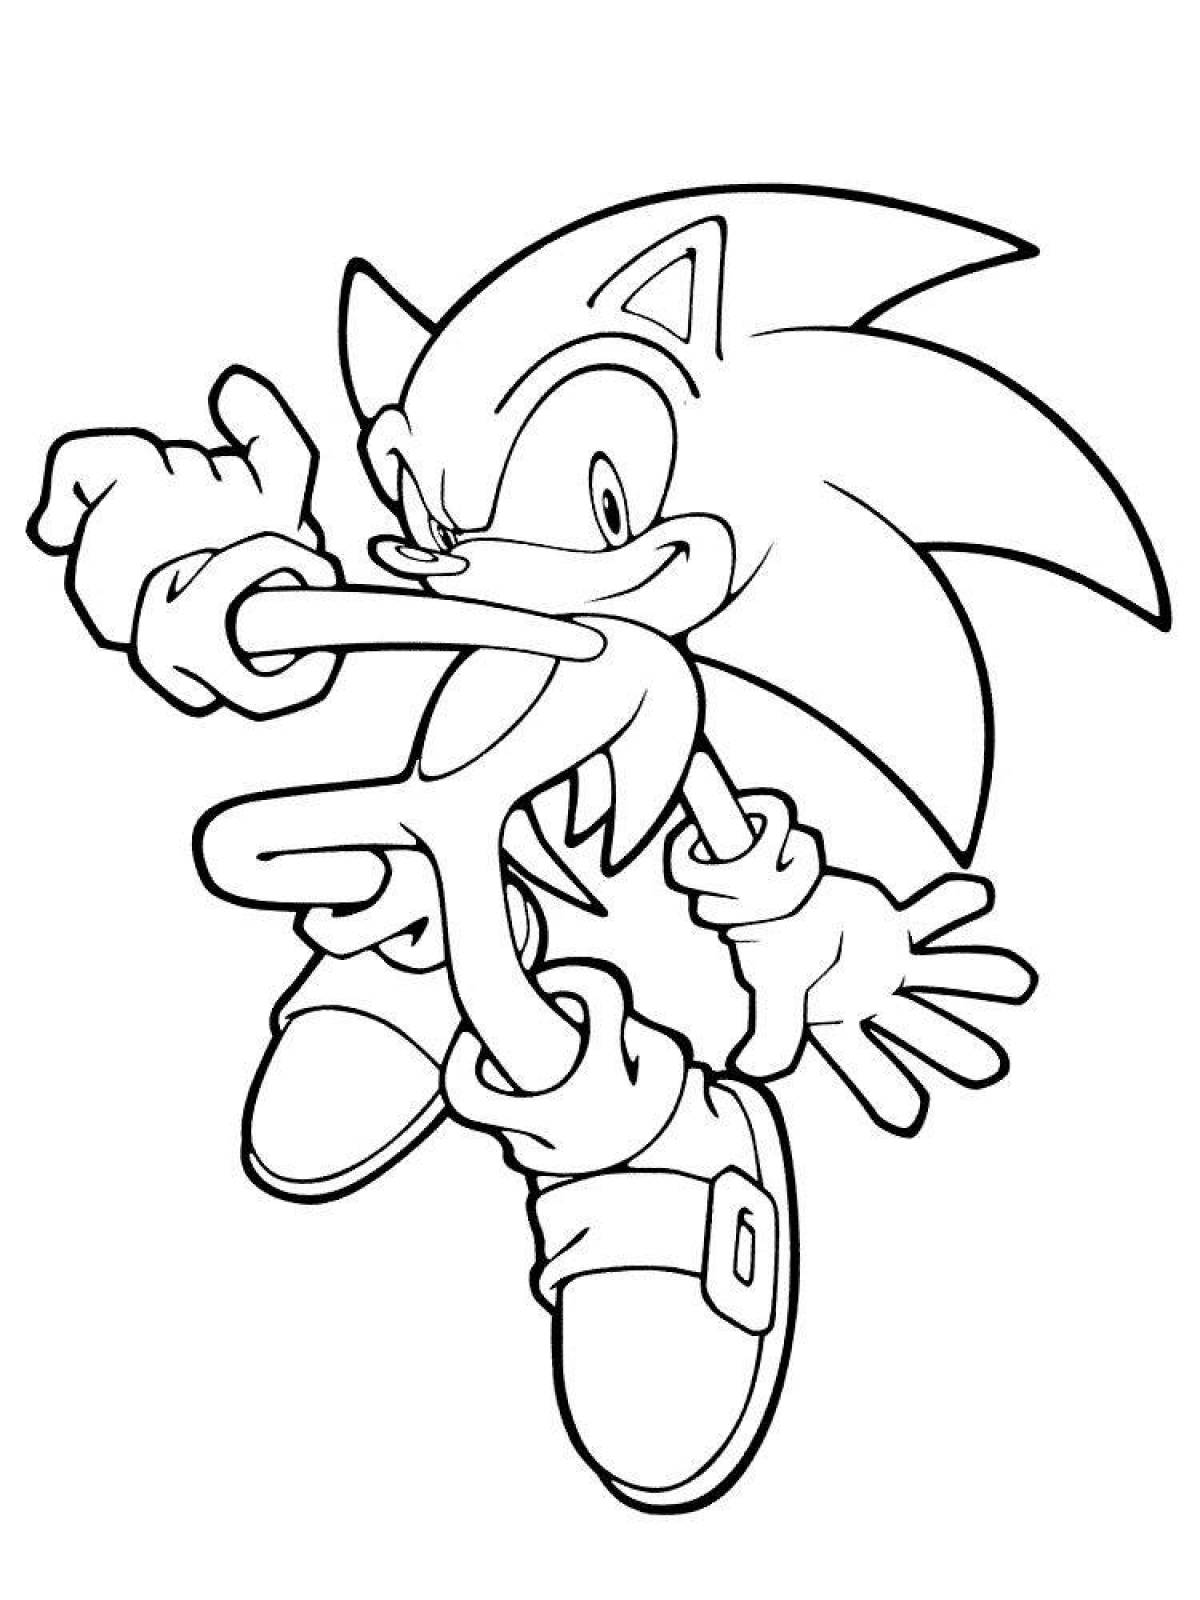 Dazzling sonic coloring book for kids